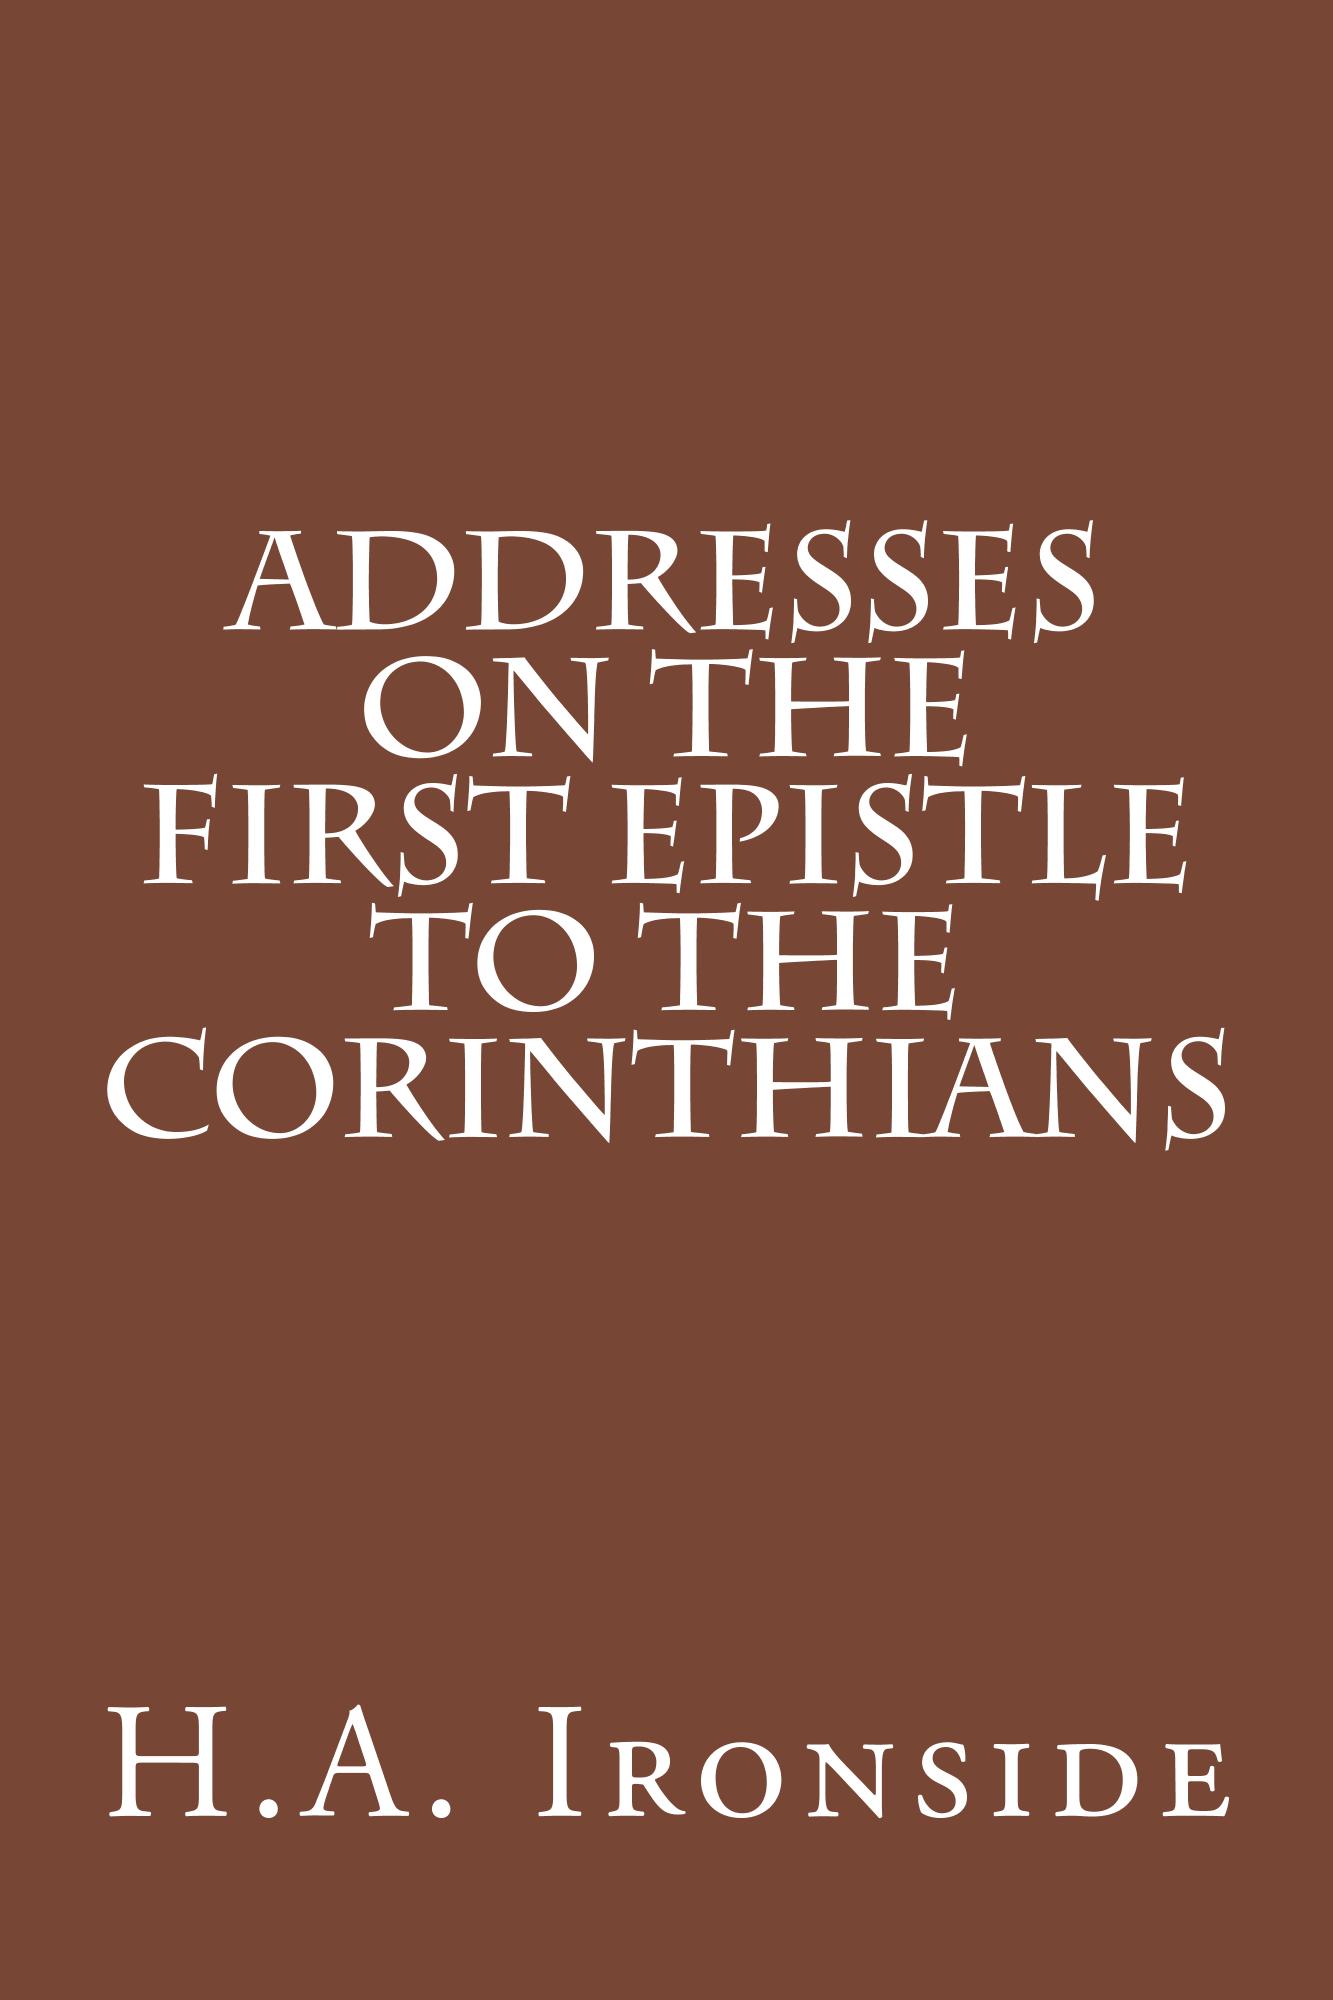 Books　by　Ironside　First　Christian　Corinthians　Solid